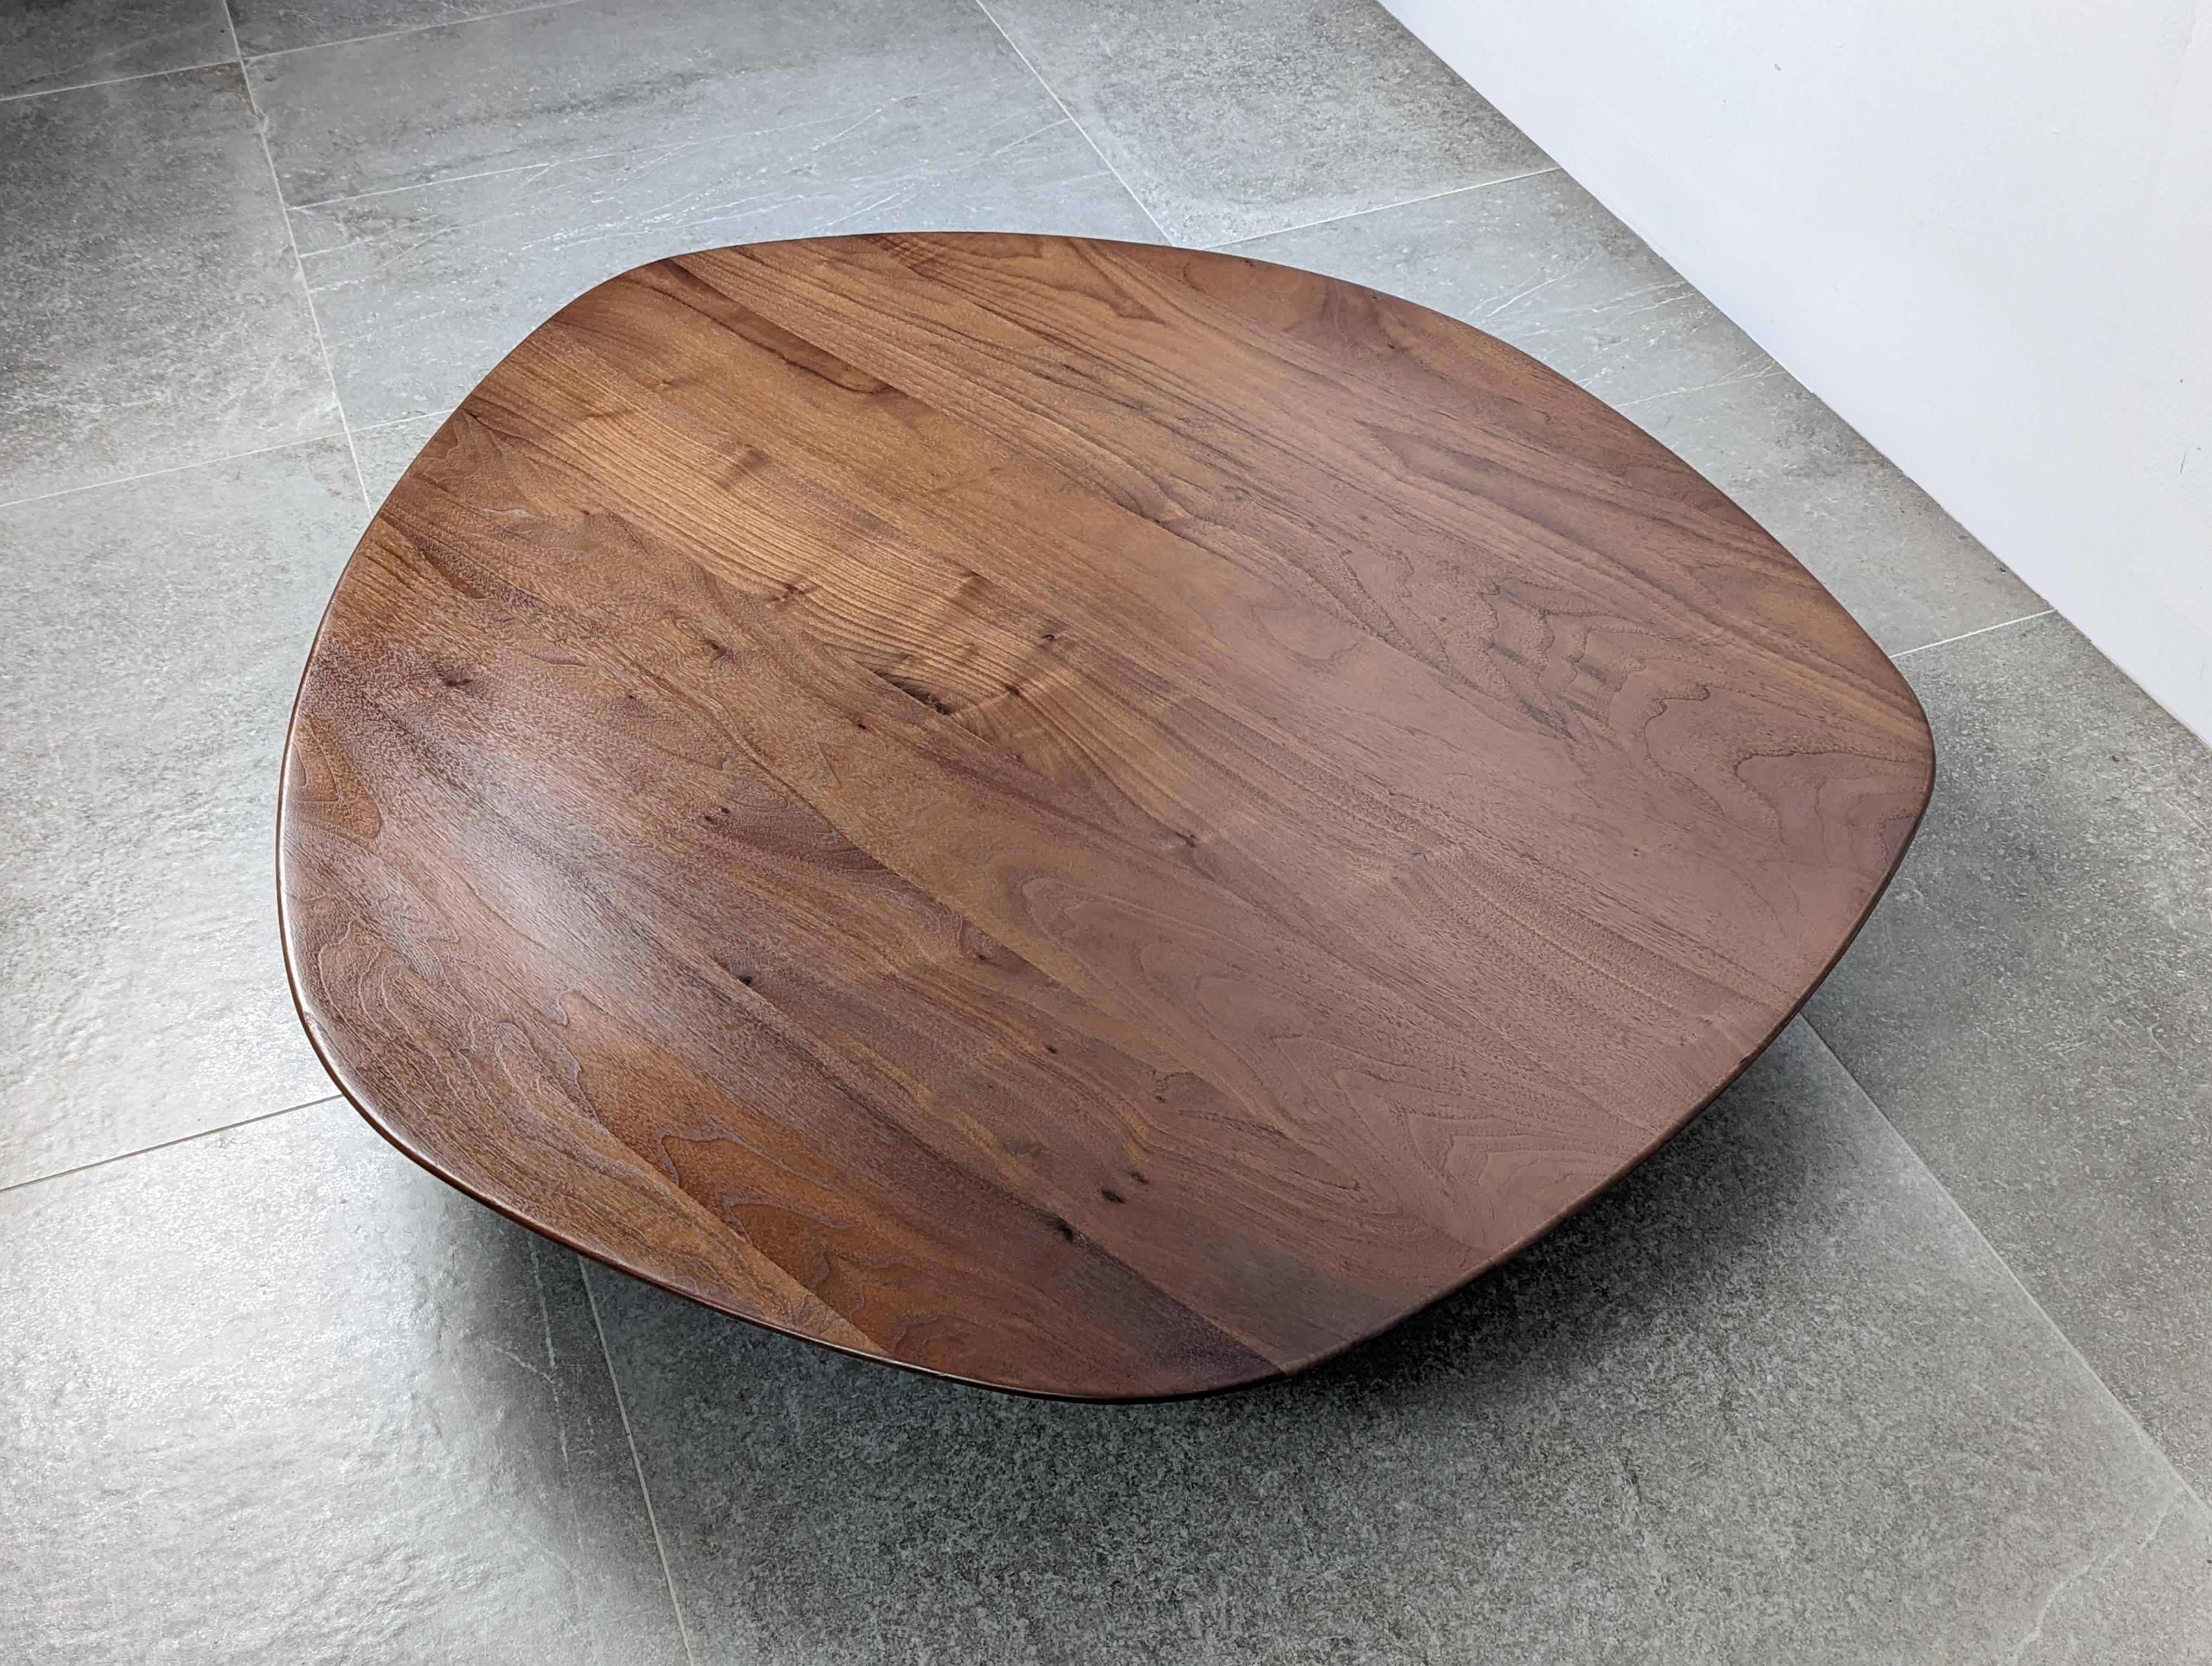 The Pebble table, designed by Nathan Young in 2008 for Ligne Roset, is a stunning example of modern design. His inspiration in the form of a stone carved by river water gives it a fluid and organic appearance. The solid, carved walnut top stands on